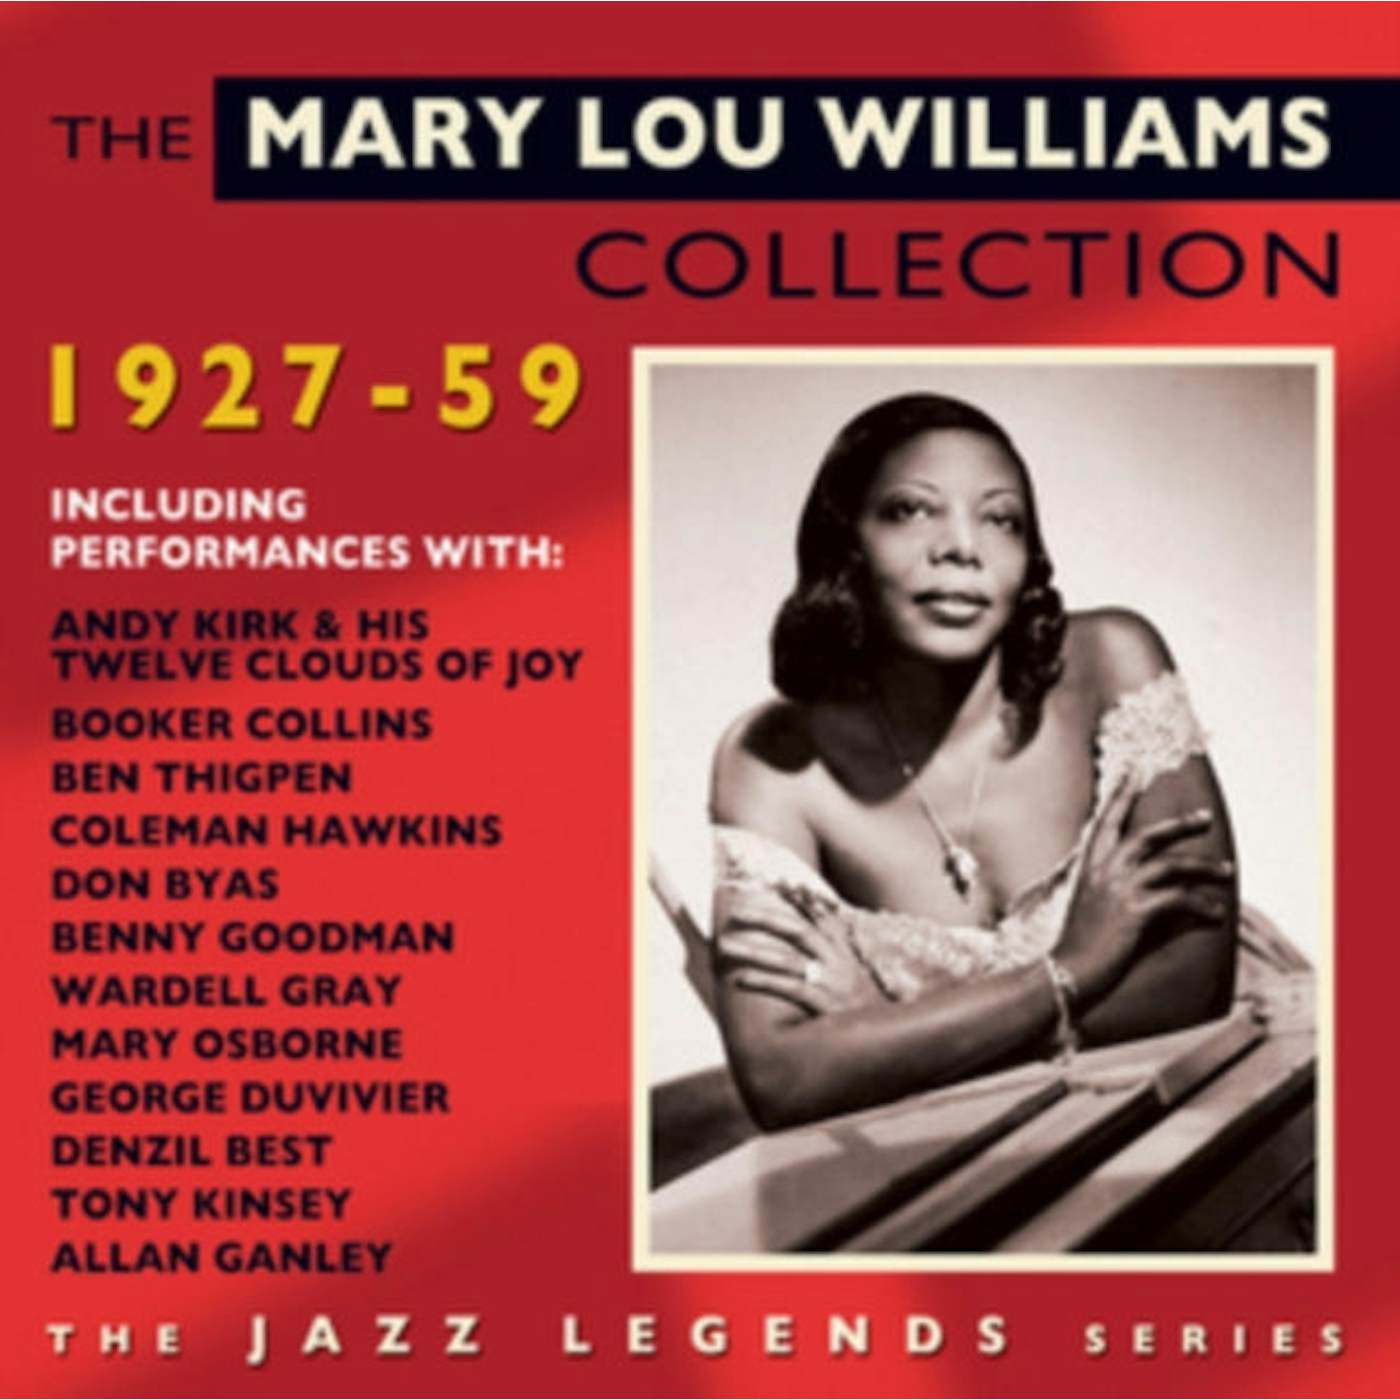 Mary Lou Williams CD - The Mary Lou Williams Collection 1927-59